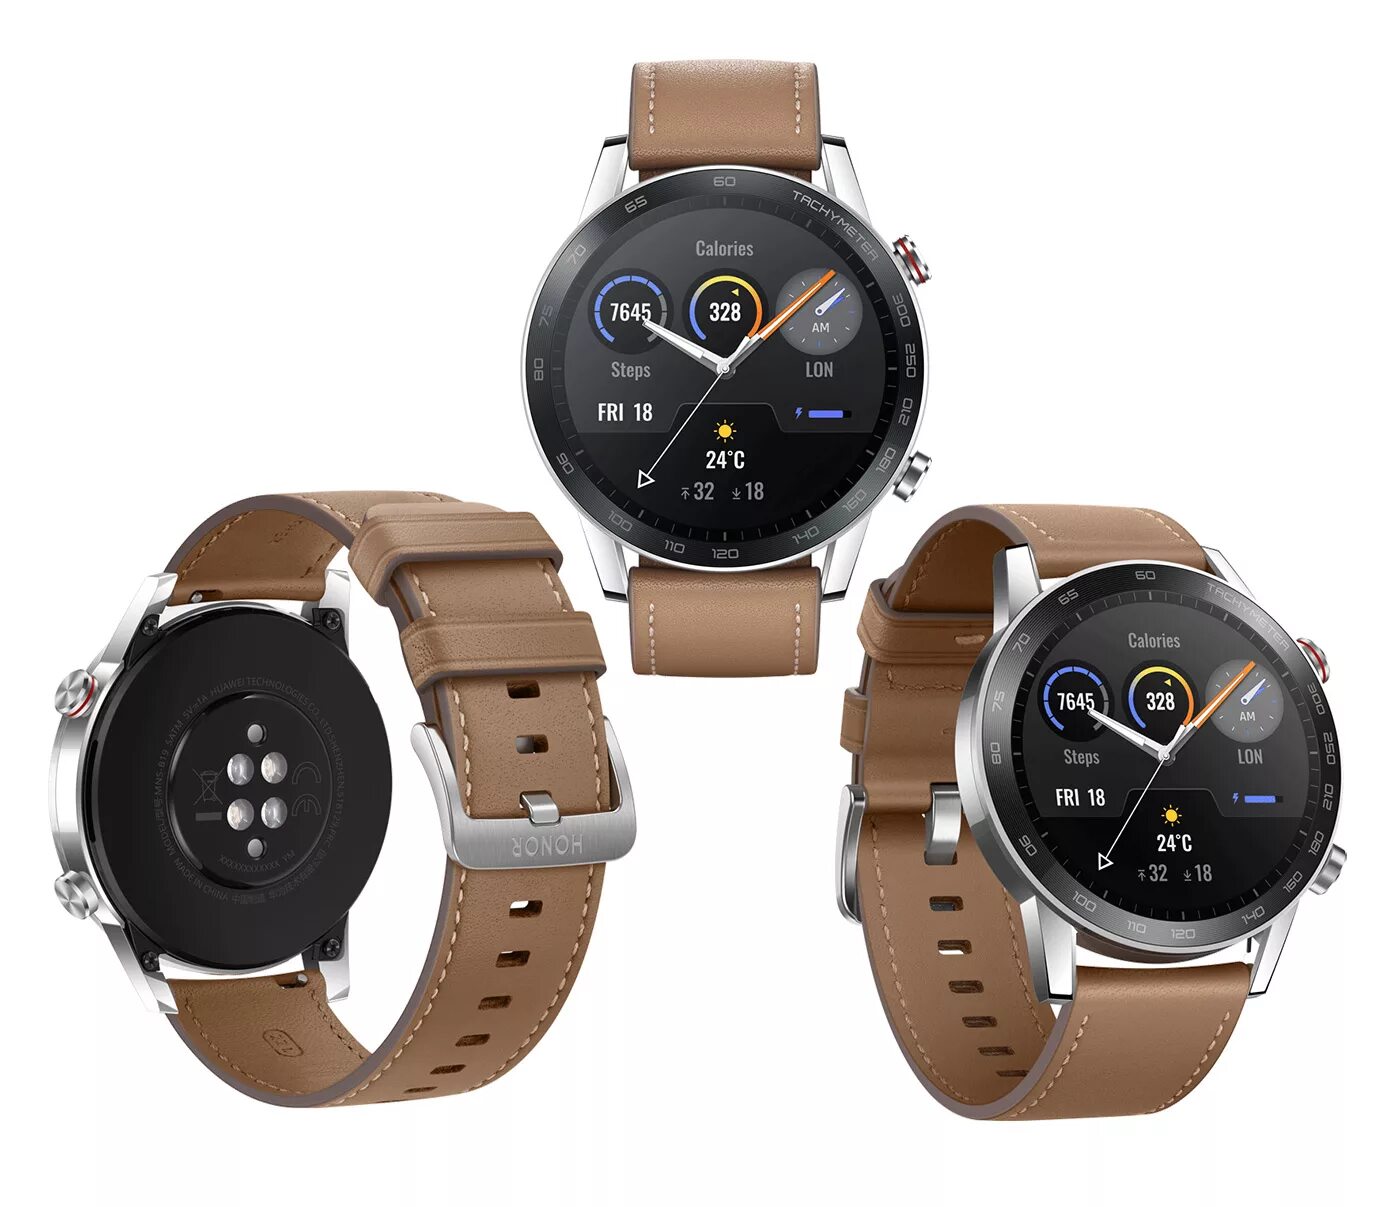 Honor magic watch 46. Honor MAGICWATCH 2. Смарт-часы Honor MAGICWATCH 2 Flax Brown (mns-b39). Honor Magic watch gt 2. Honor watch Magic 2 46mm Flax Brown.